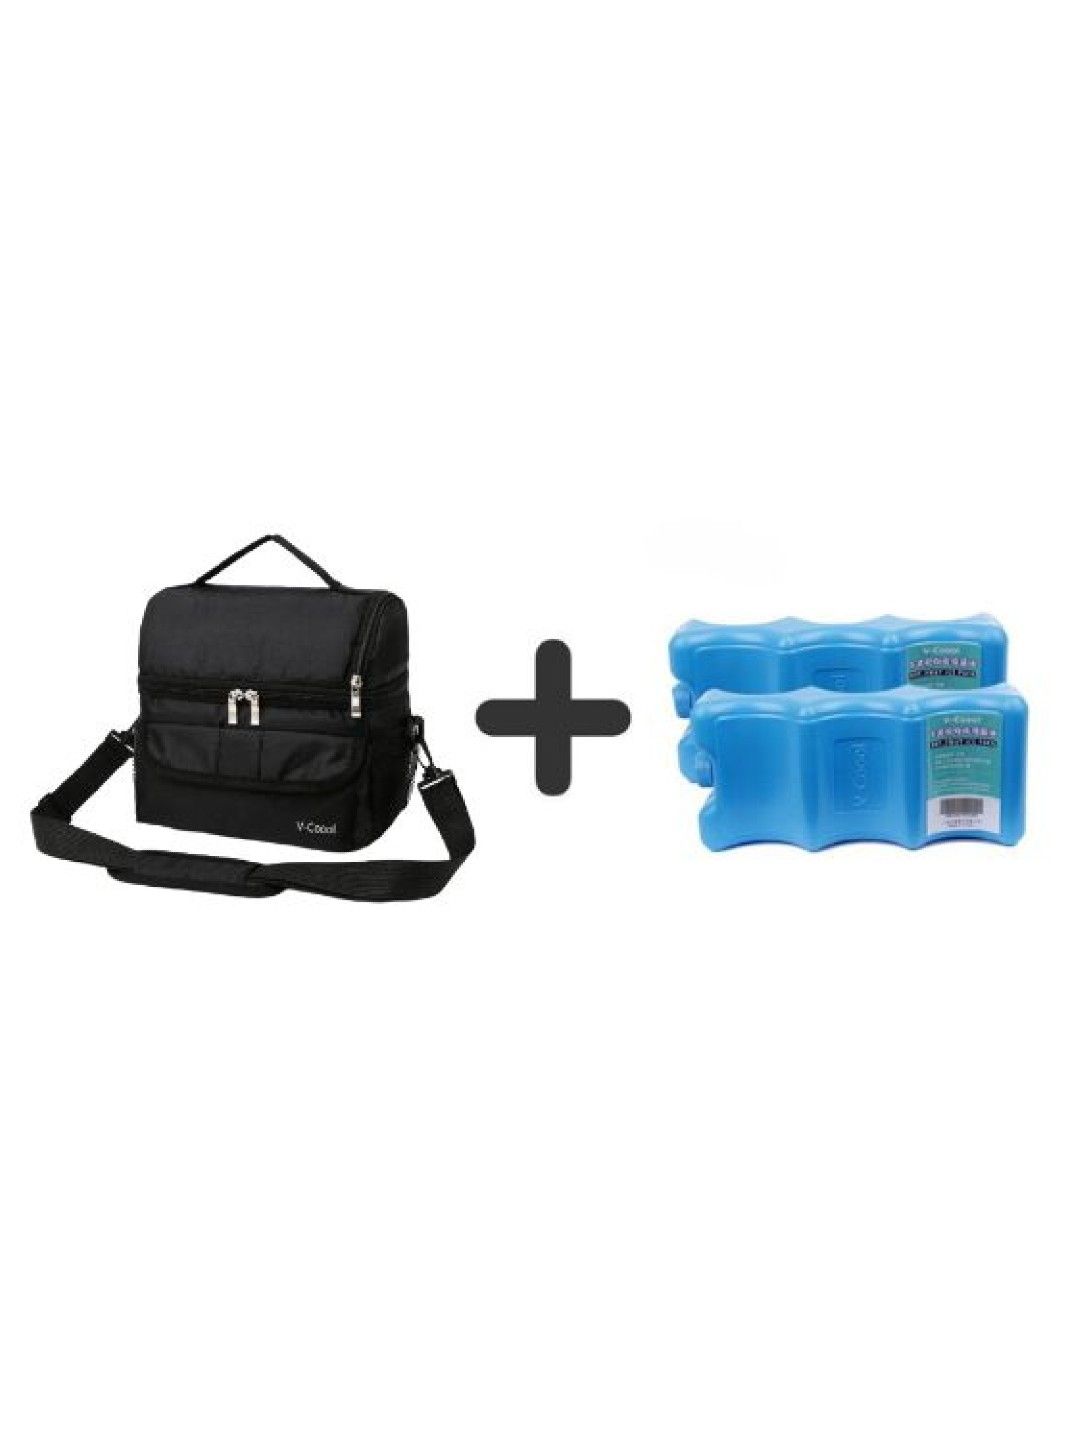 V-coool Thermal Cooler Tote Insulated Bag with Ice Bricks